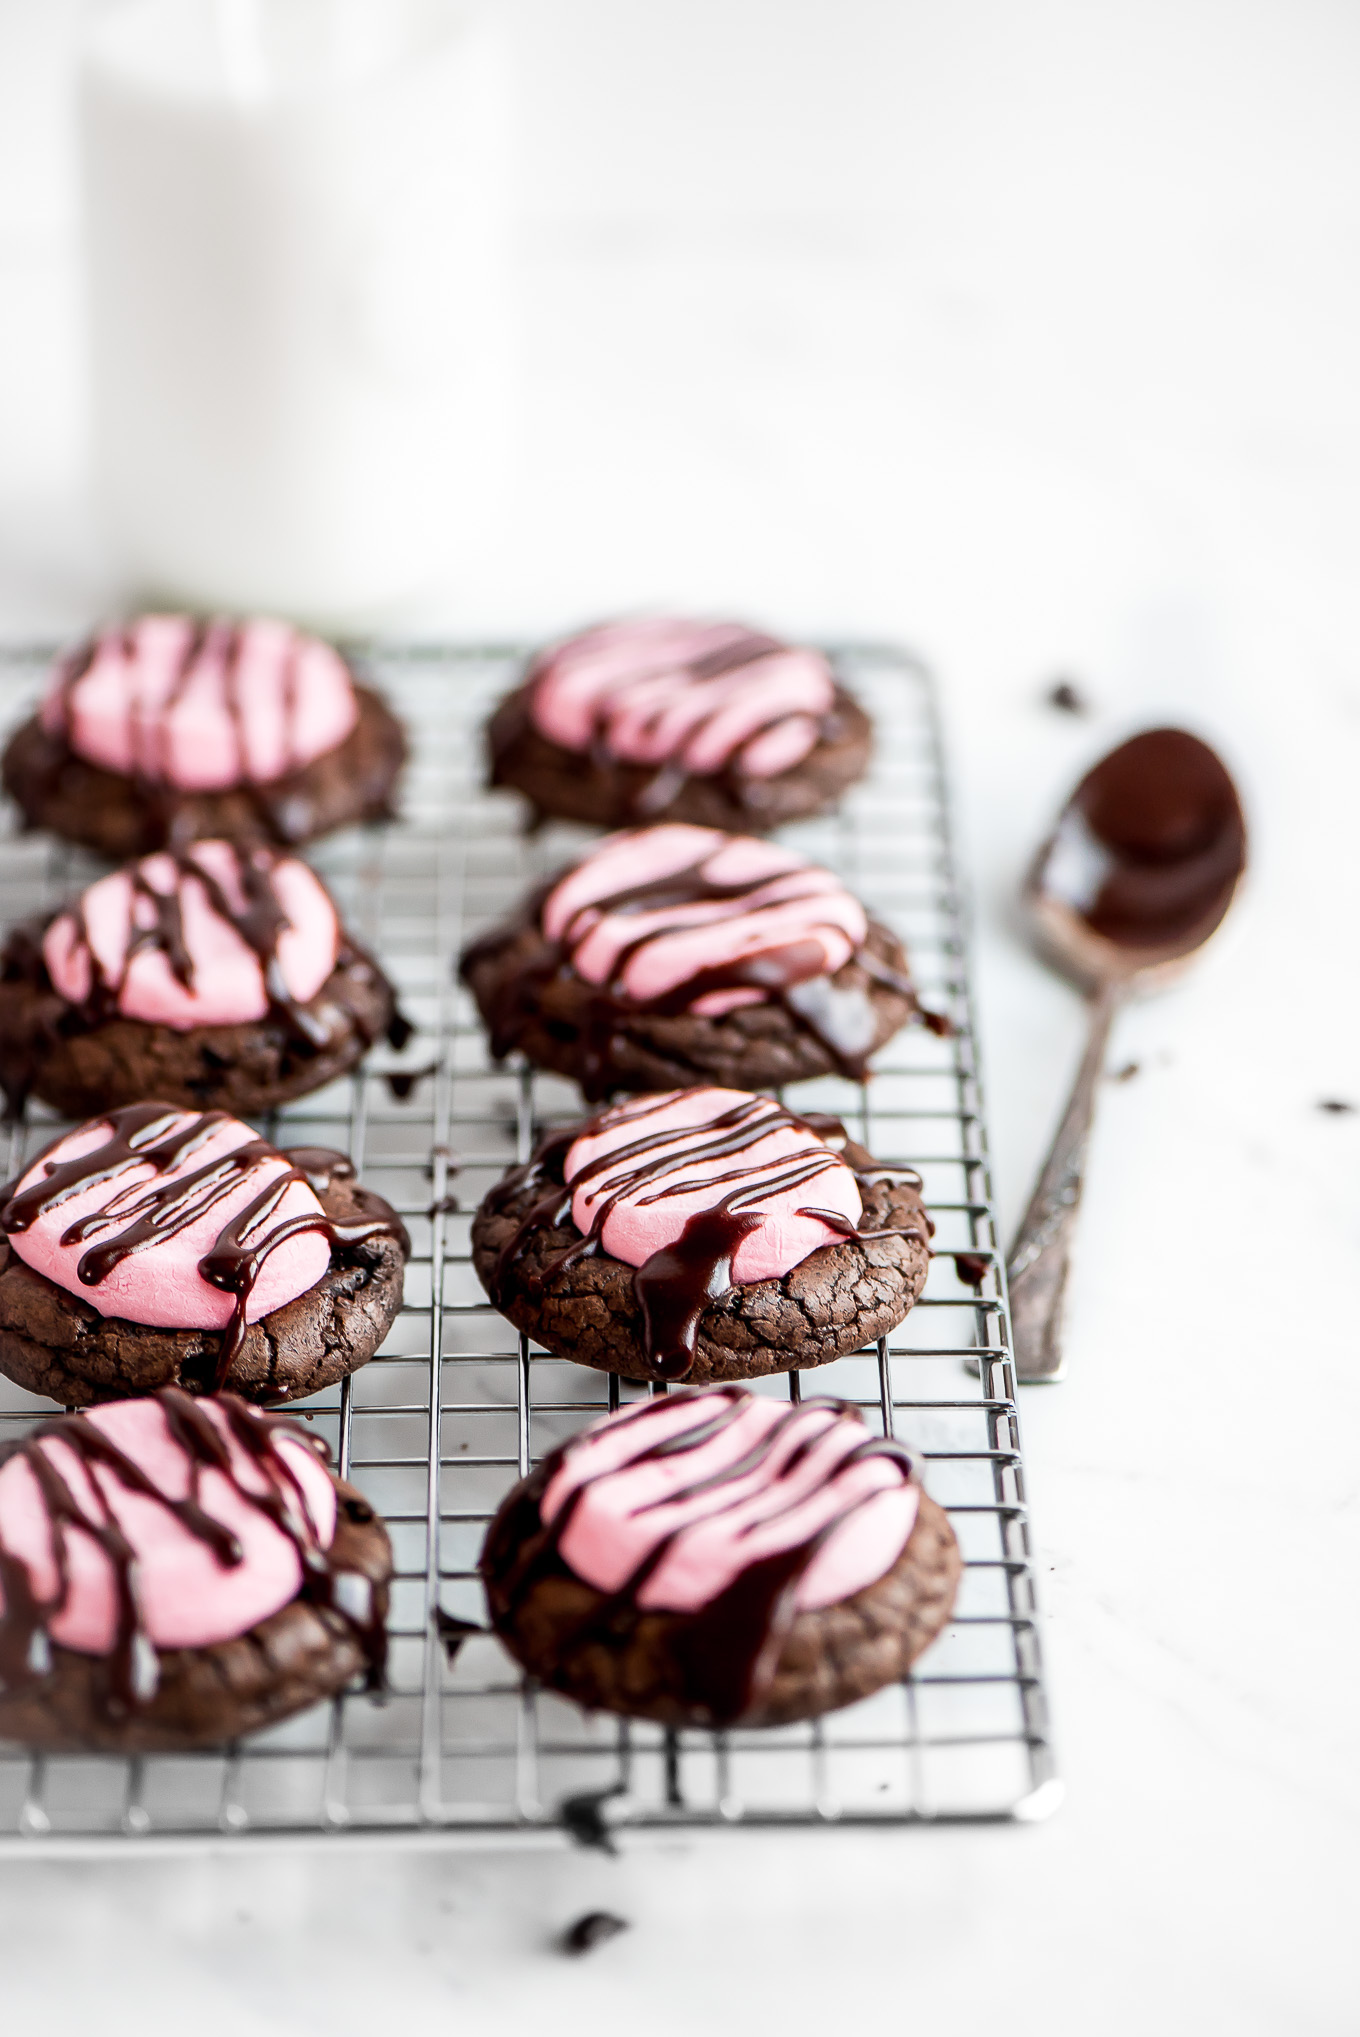 Strawberry Chocolate Marshmallow Cookies drizzled with chocolate icing, sitting on a cooling rack with a icing coated spoon to the side.